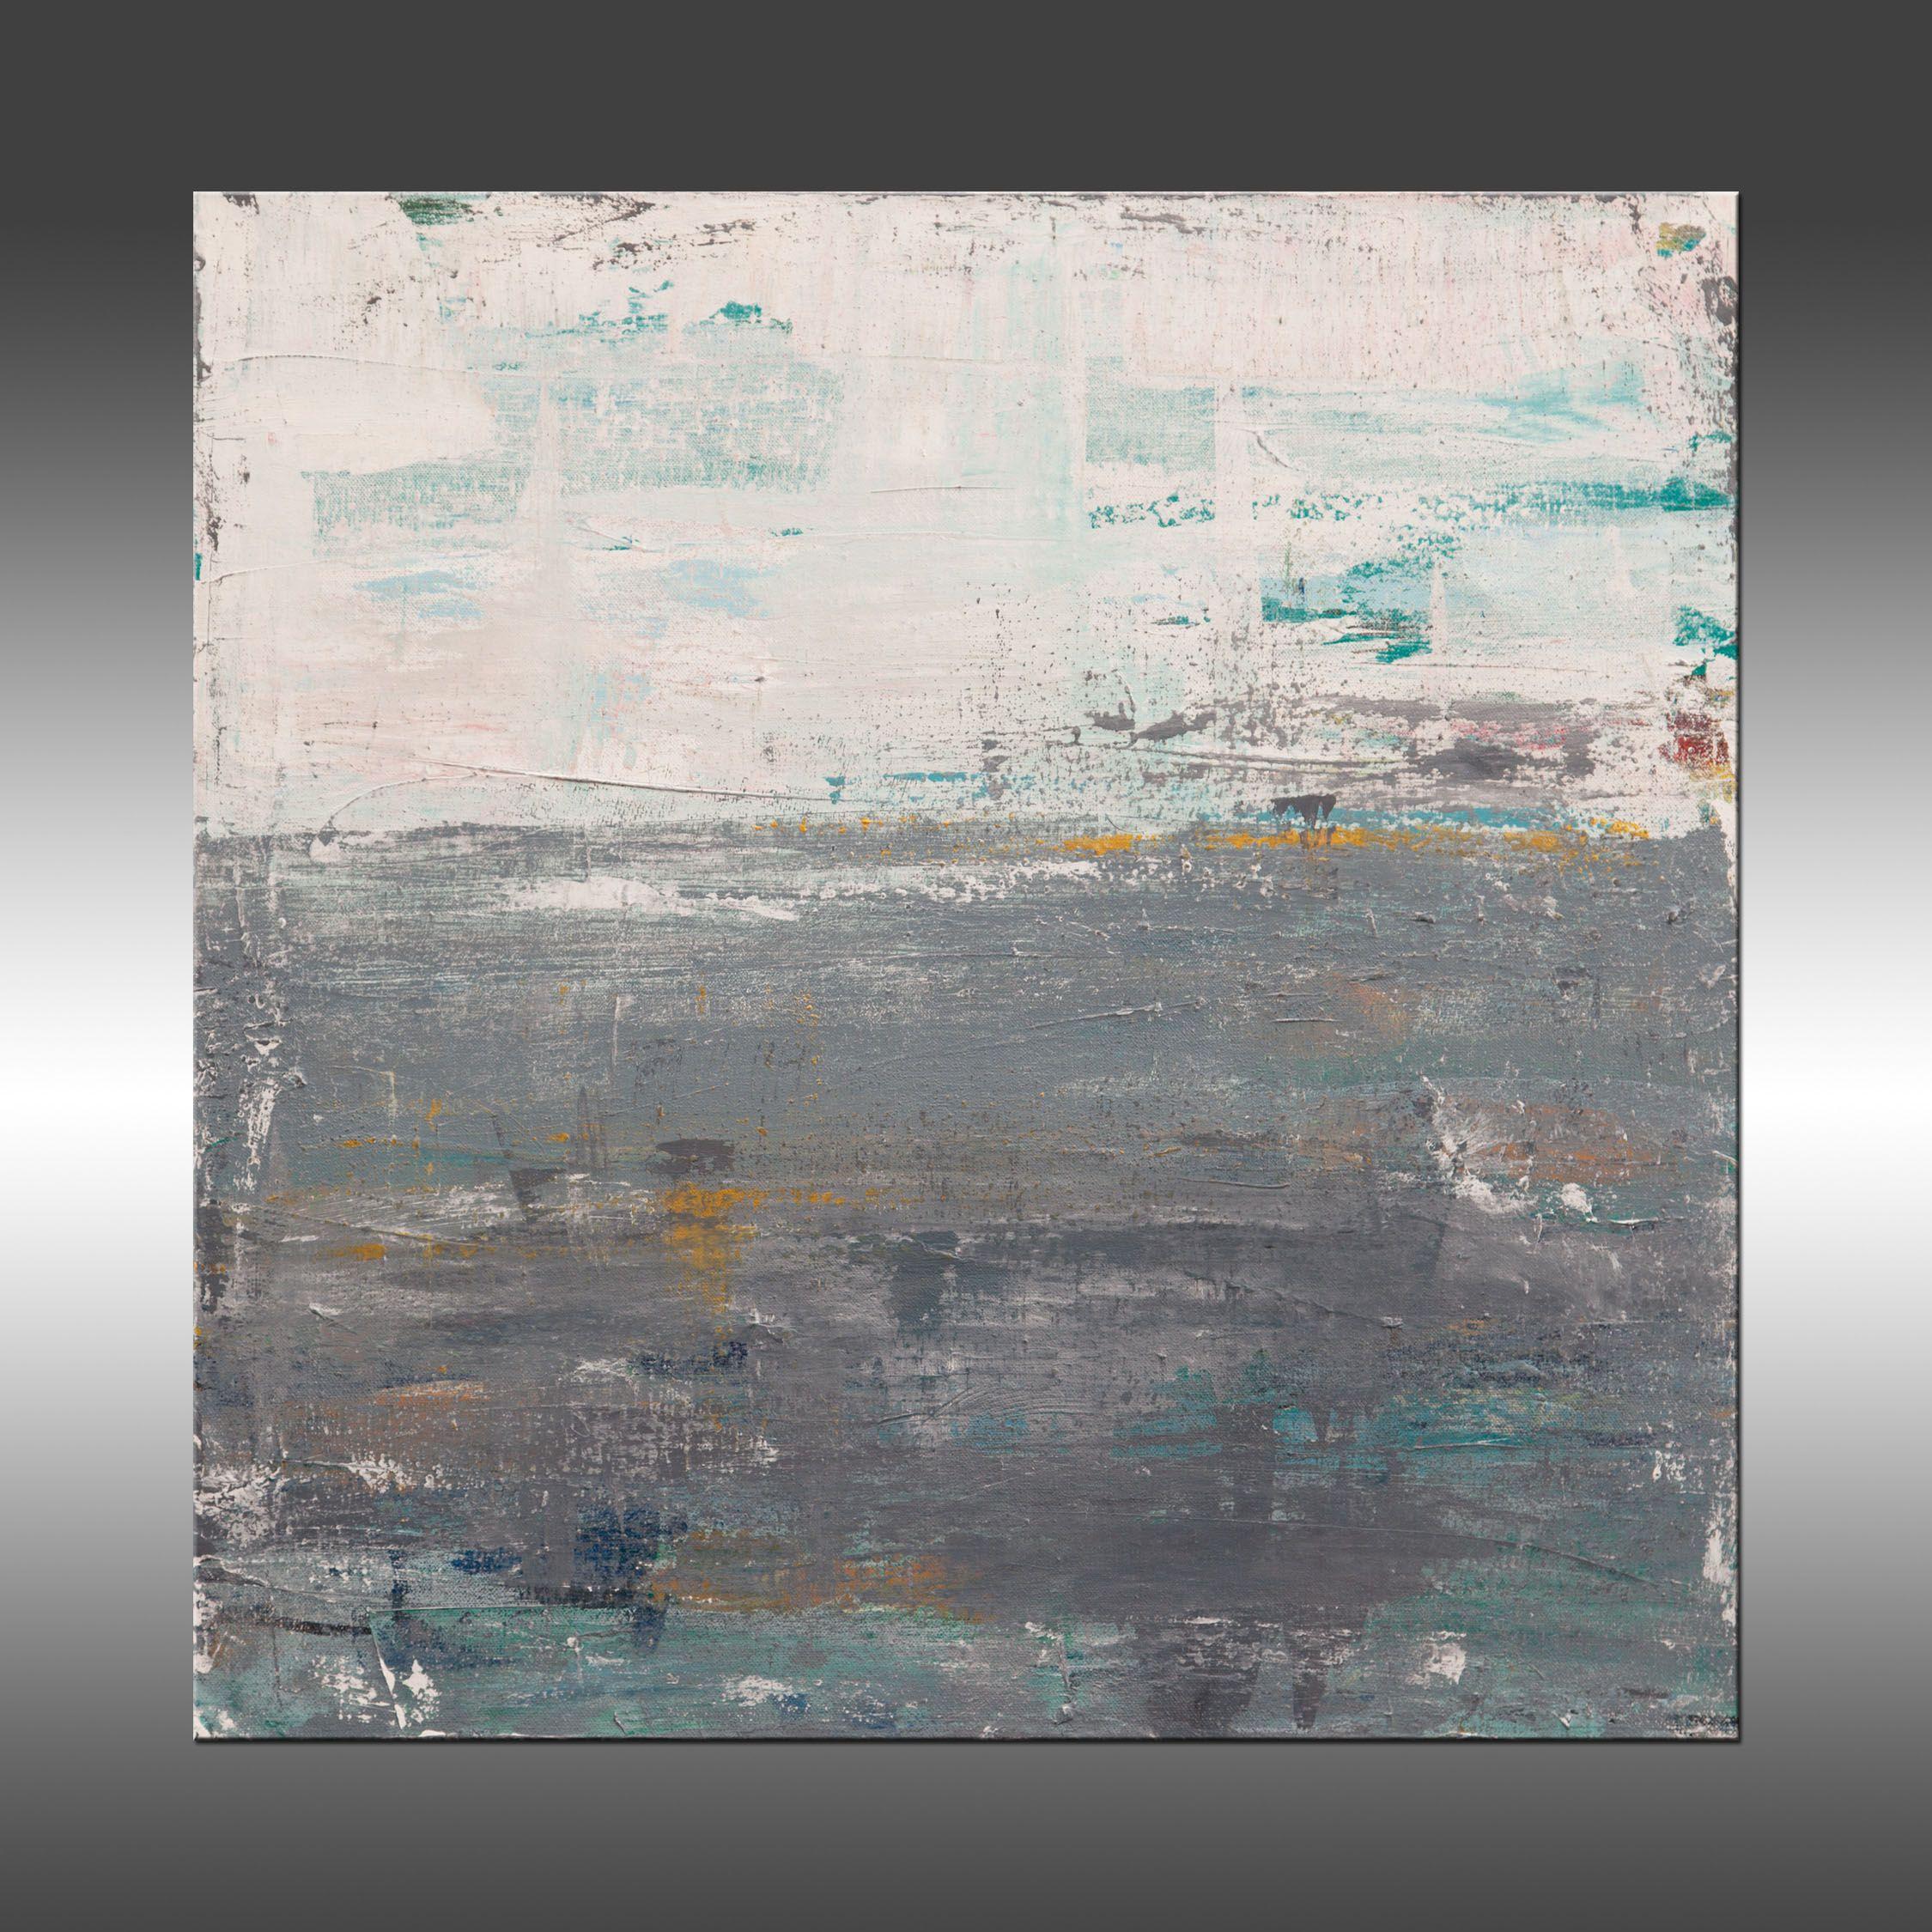 Modern Industrial 45 is an original painting, created with acrylic paint on gallery-wrapped canvas. It has a width of 24 inches and a height of 24 inches with a depth of 1.5 inches (24x24x1.5).    The colors used in the painting are white, gray,